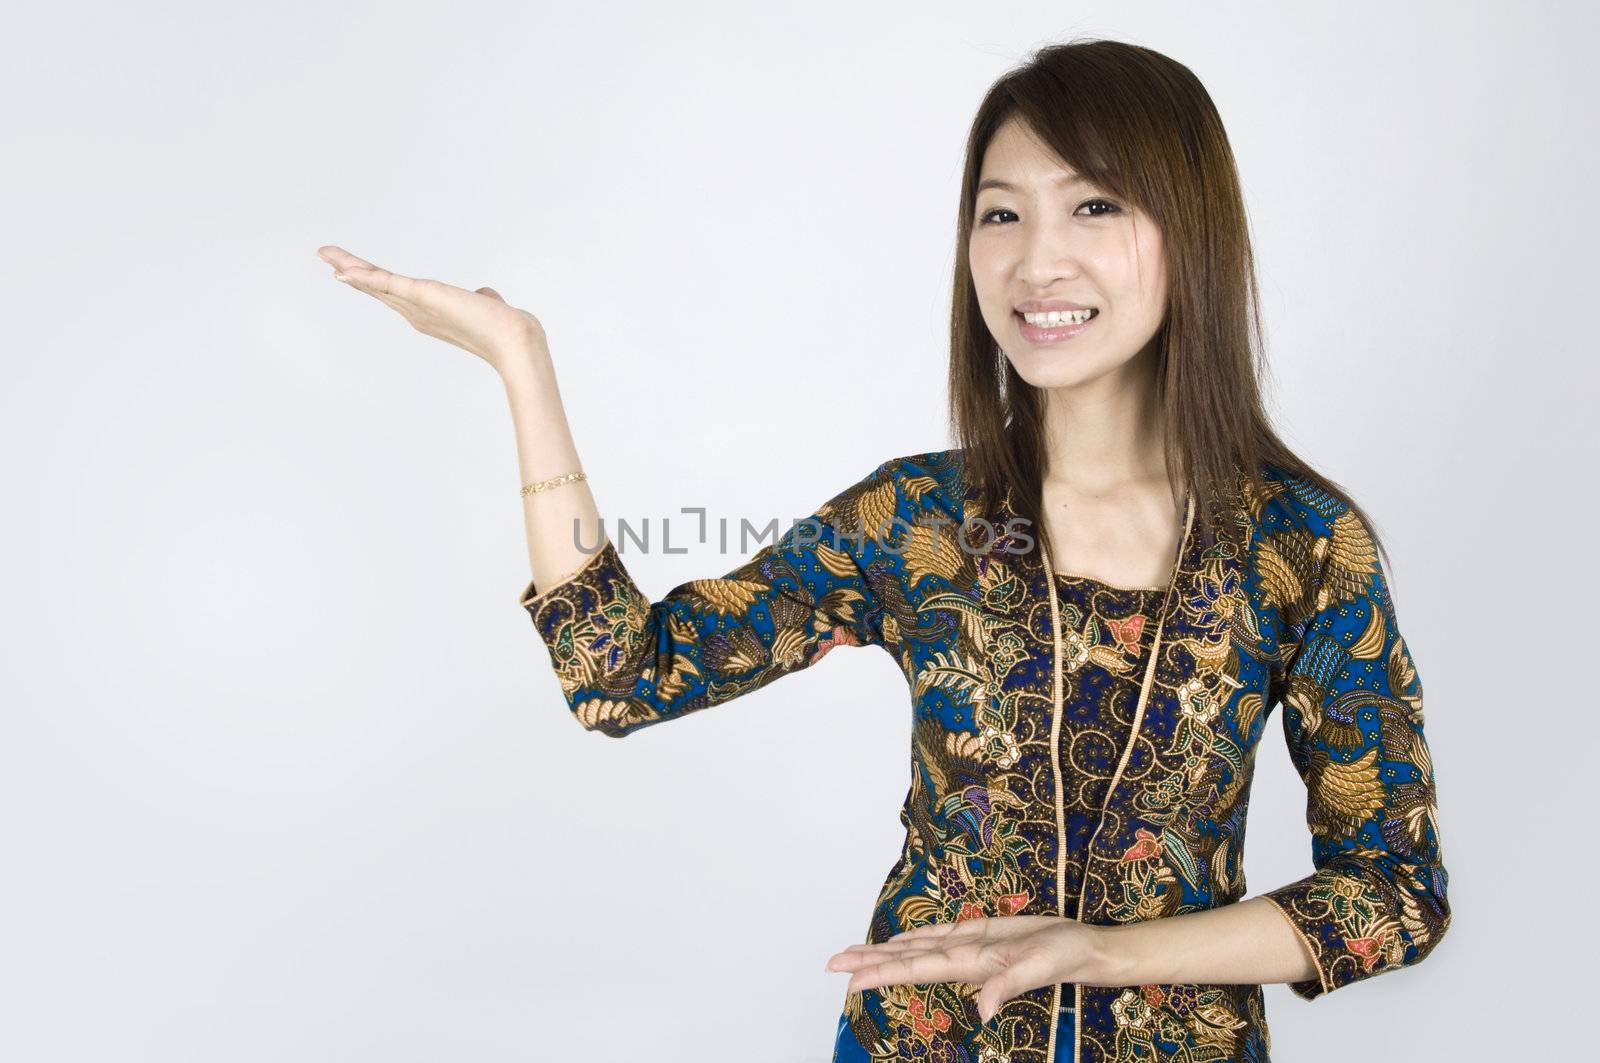 asian girl on a batik suit while posing a welcome sign